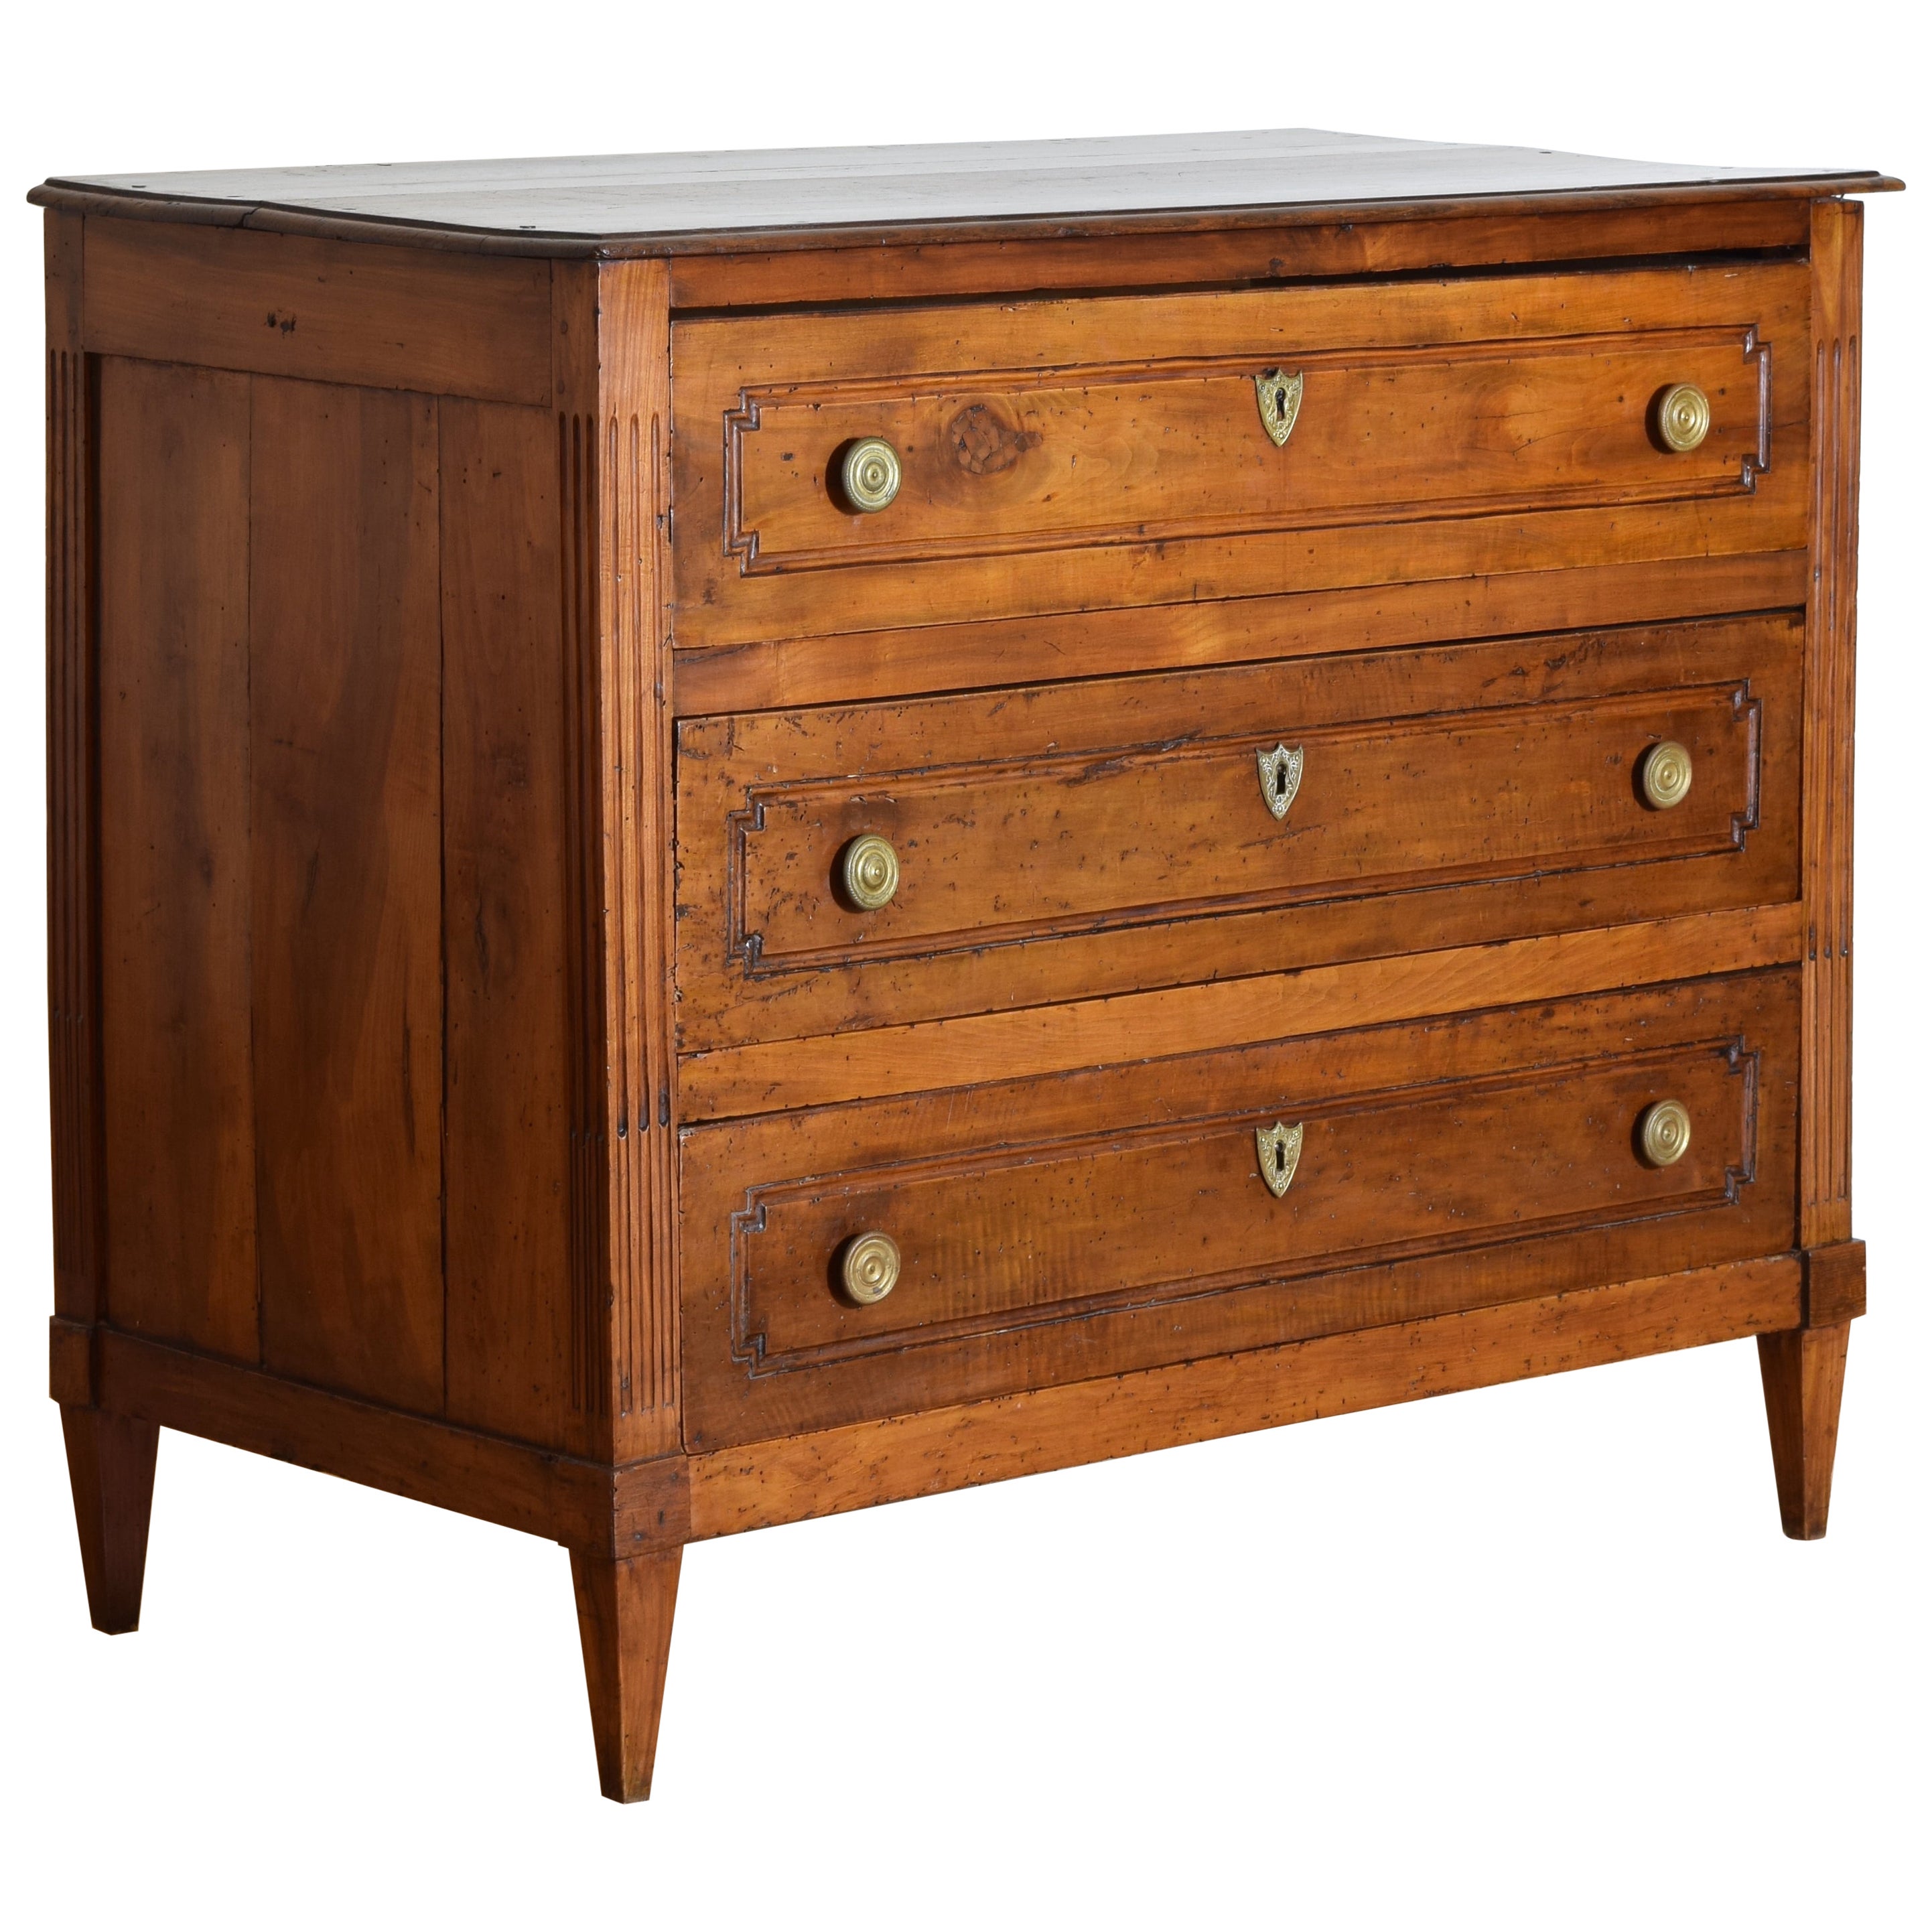 French Louis XVI 3-Drawer Commode in Carved Walnut, ca. 1780